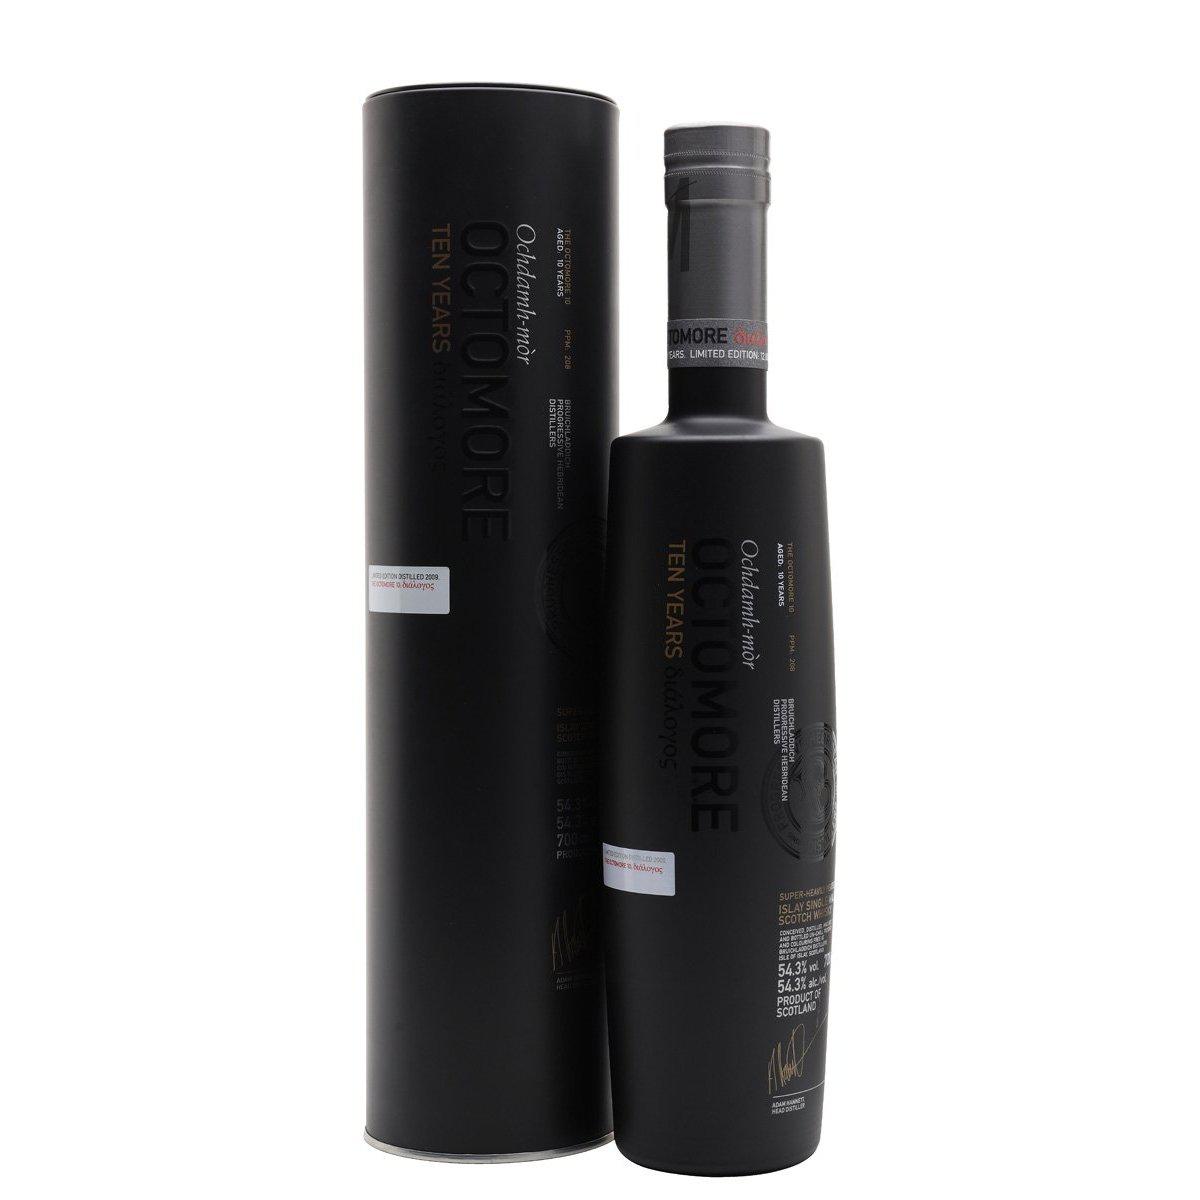 Bruichladdich Octomore 10 Years Old 2009 4th Edition Limited Edition Super Heavily Peated Islay Single Malt Scotch Whisky 700ml